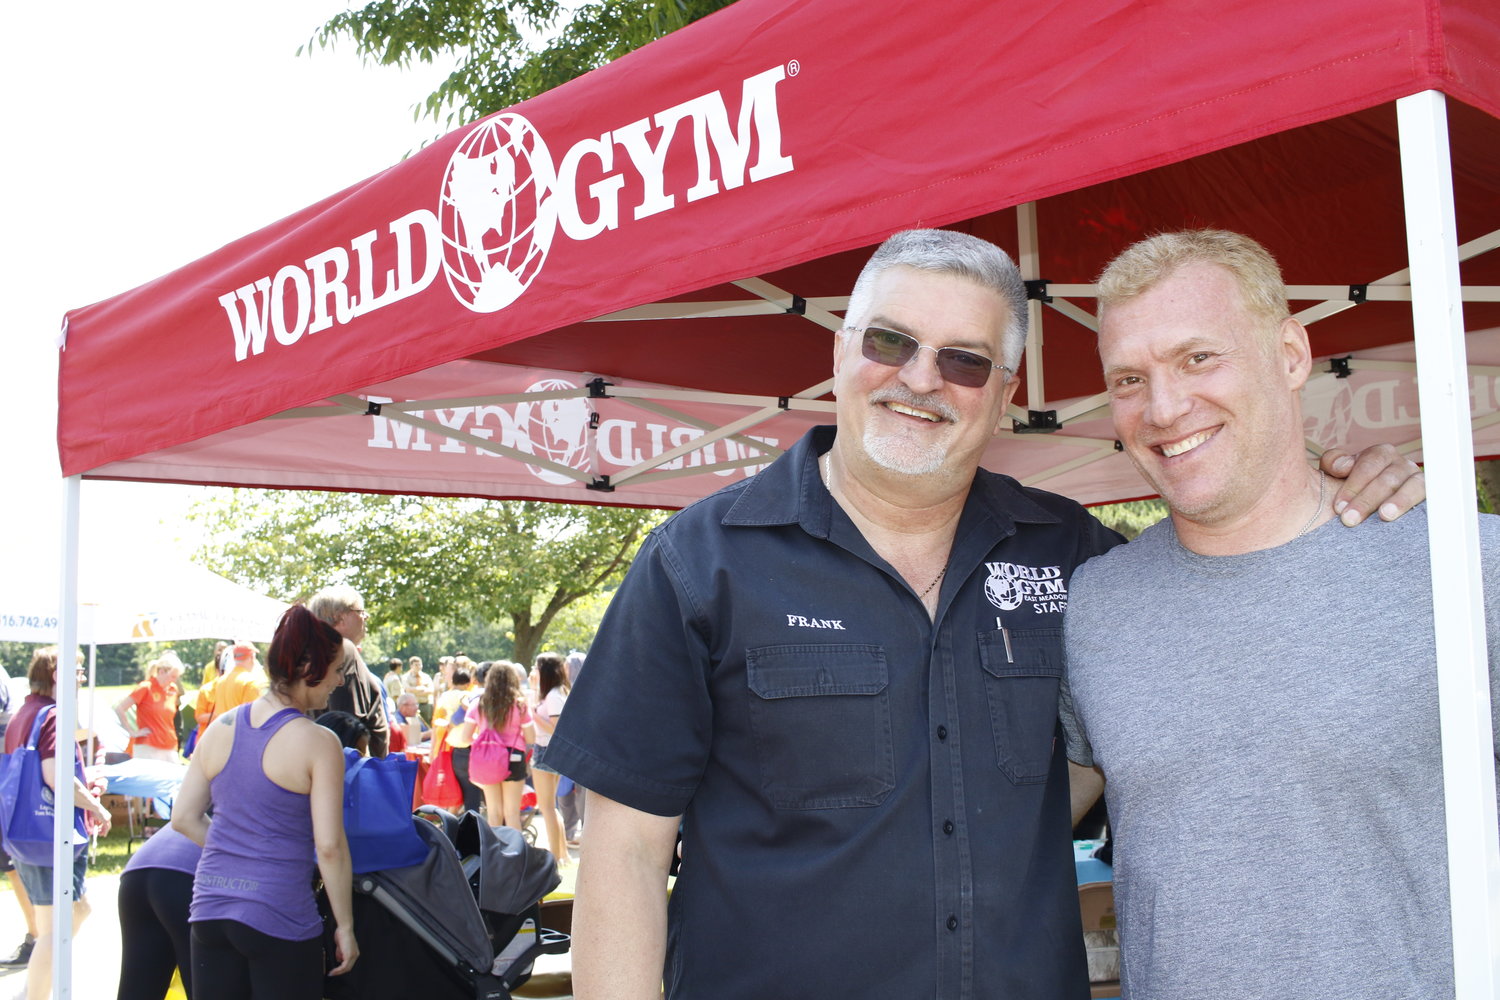 Frank Camarano, board chairman of the East Meadow Chamber of Commerce and owner of World Gym, spoke about the value of “experiential retail,” which gives customers an experience they can’t get online. Above, Camarano, left, with chamber President Michael Levy at the chamber’s annual community Pride Day in June.